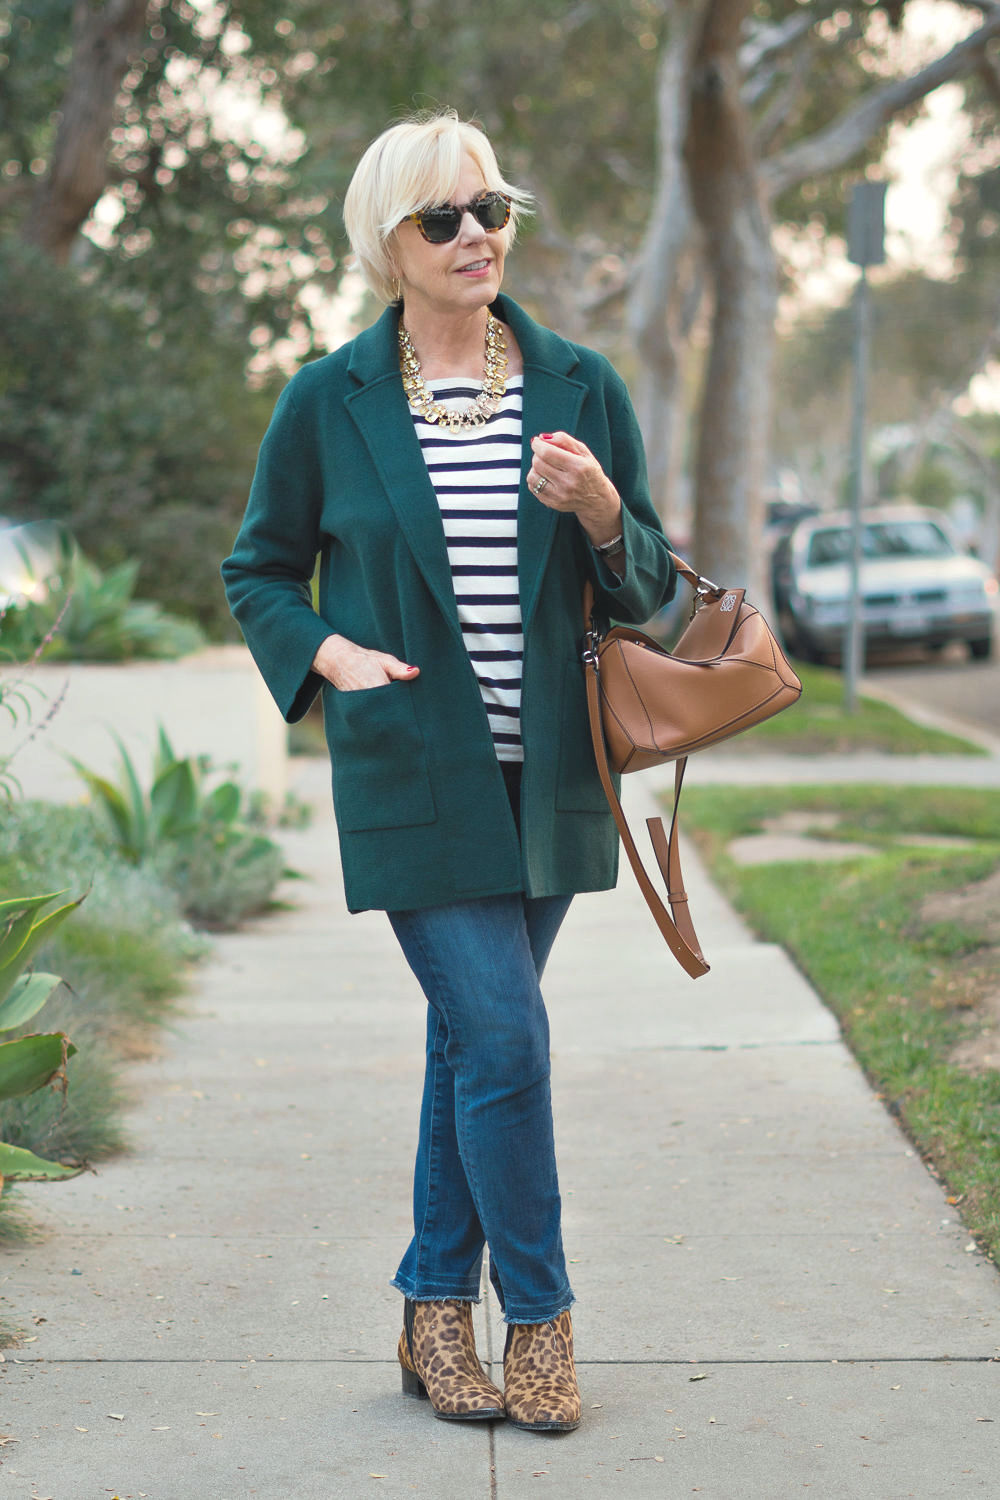 Style blogger Susan B. wears a J.Crew pine sweater jacket, striped tee, crystal necklace and leopard boots. Details at une femme d'un certain age.